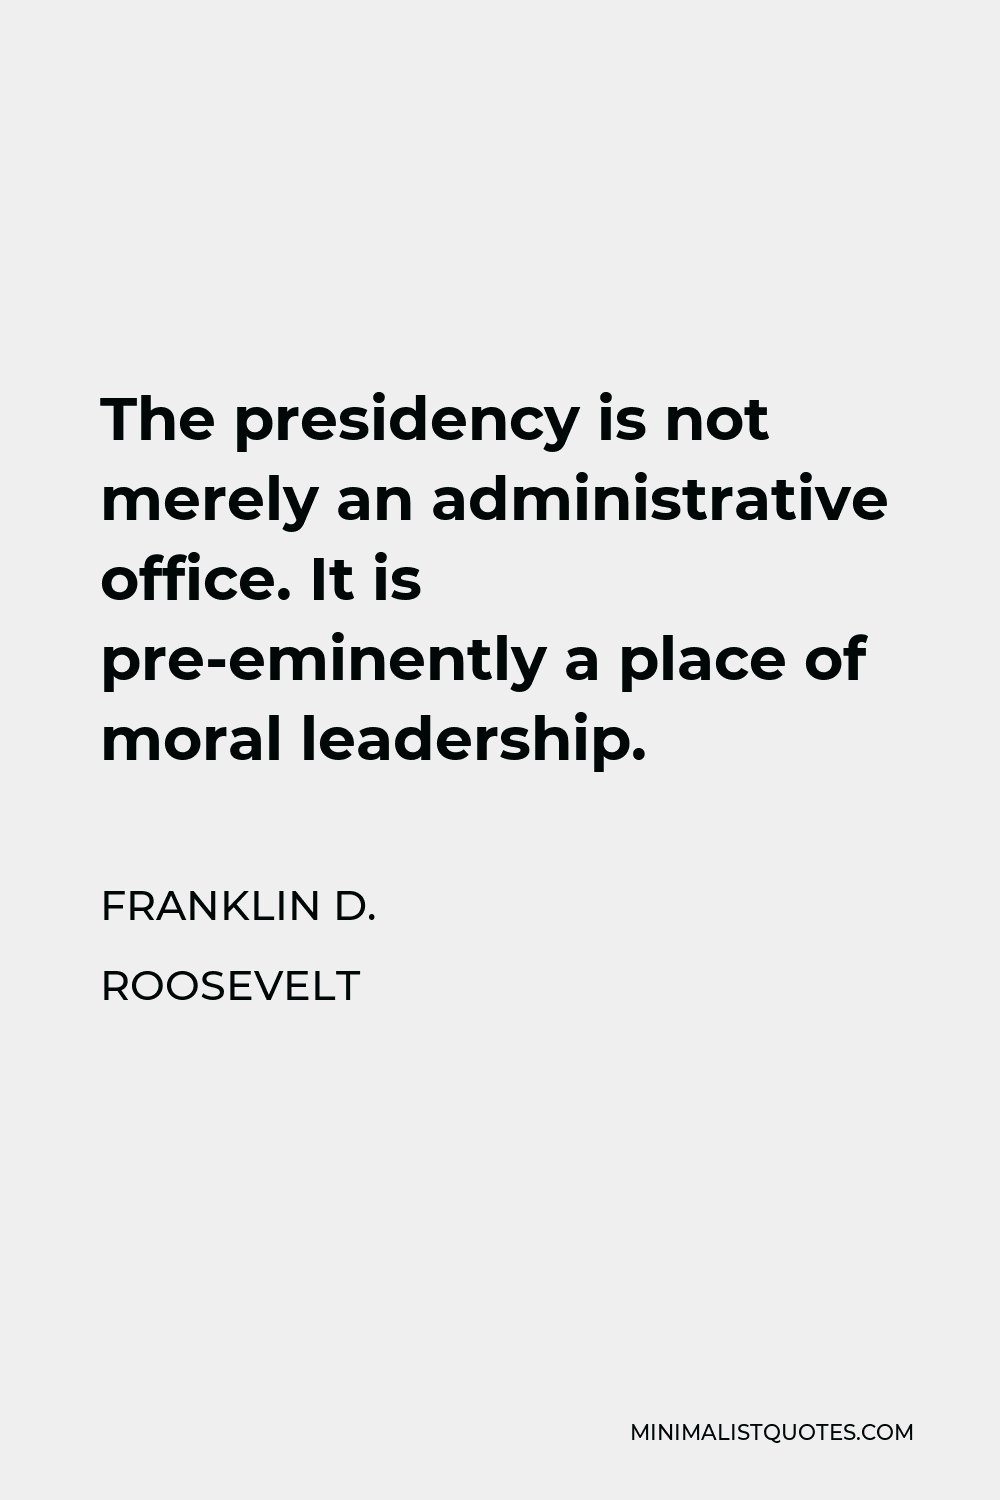 Franklin D. Roosevelt Quote - The presidency is not merely an administrative office. It is pre-eminently a place of moral leadership.